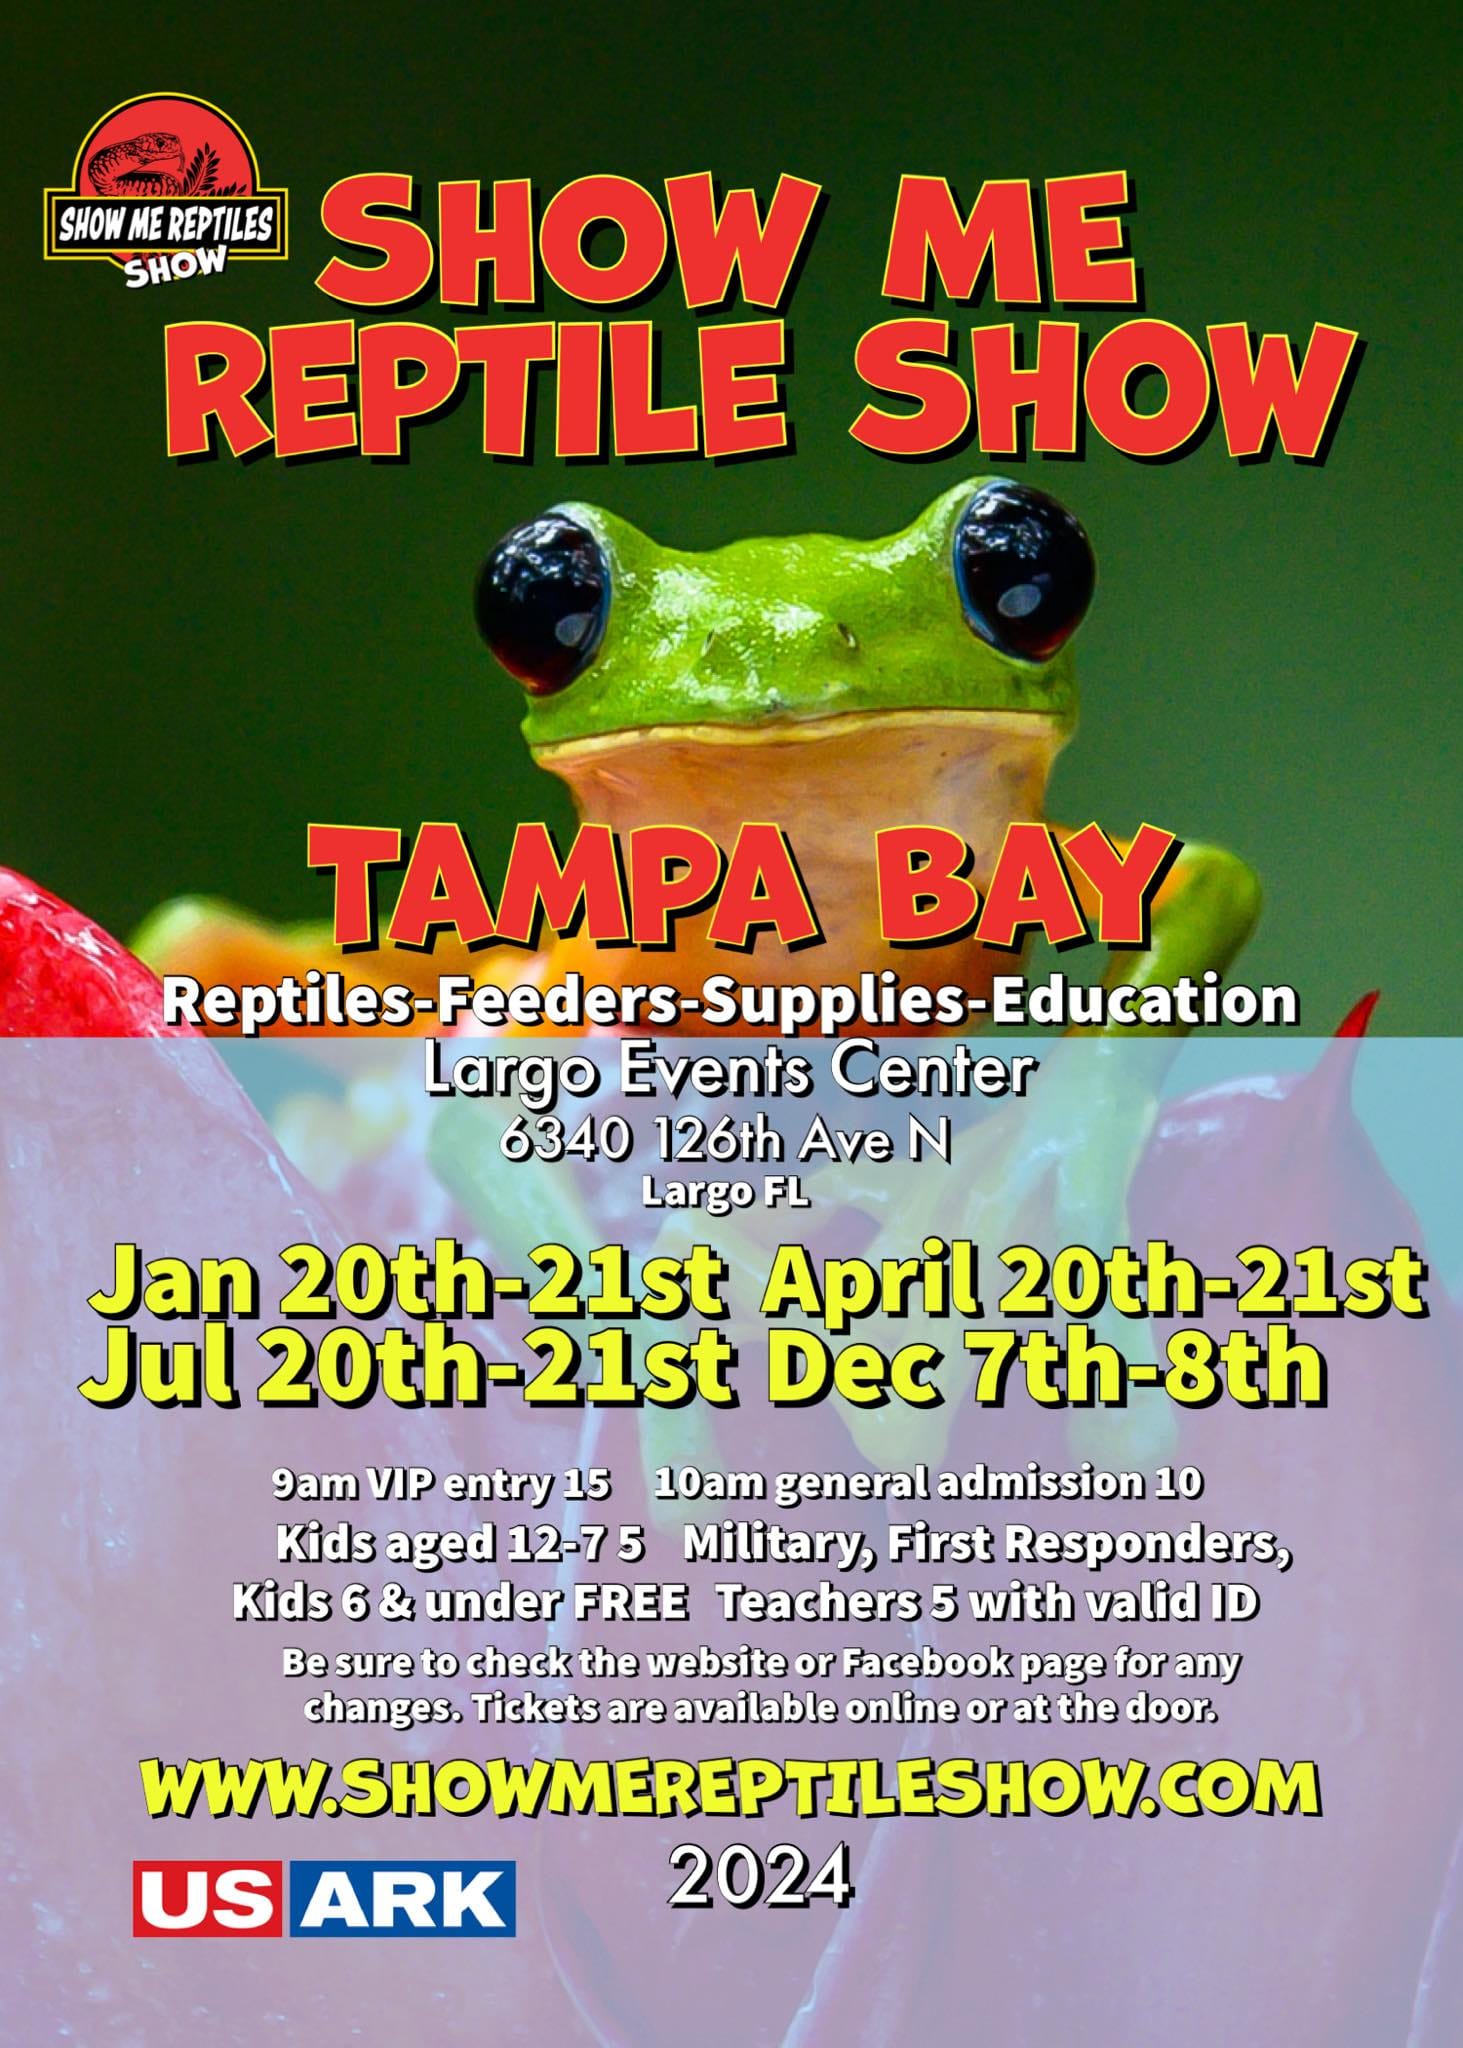 Big Reptile Show in Tampa Bay This Weekend